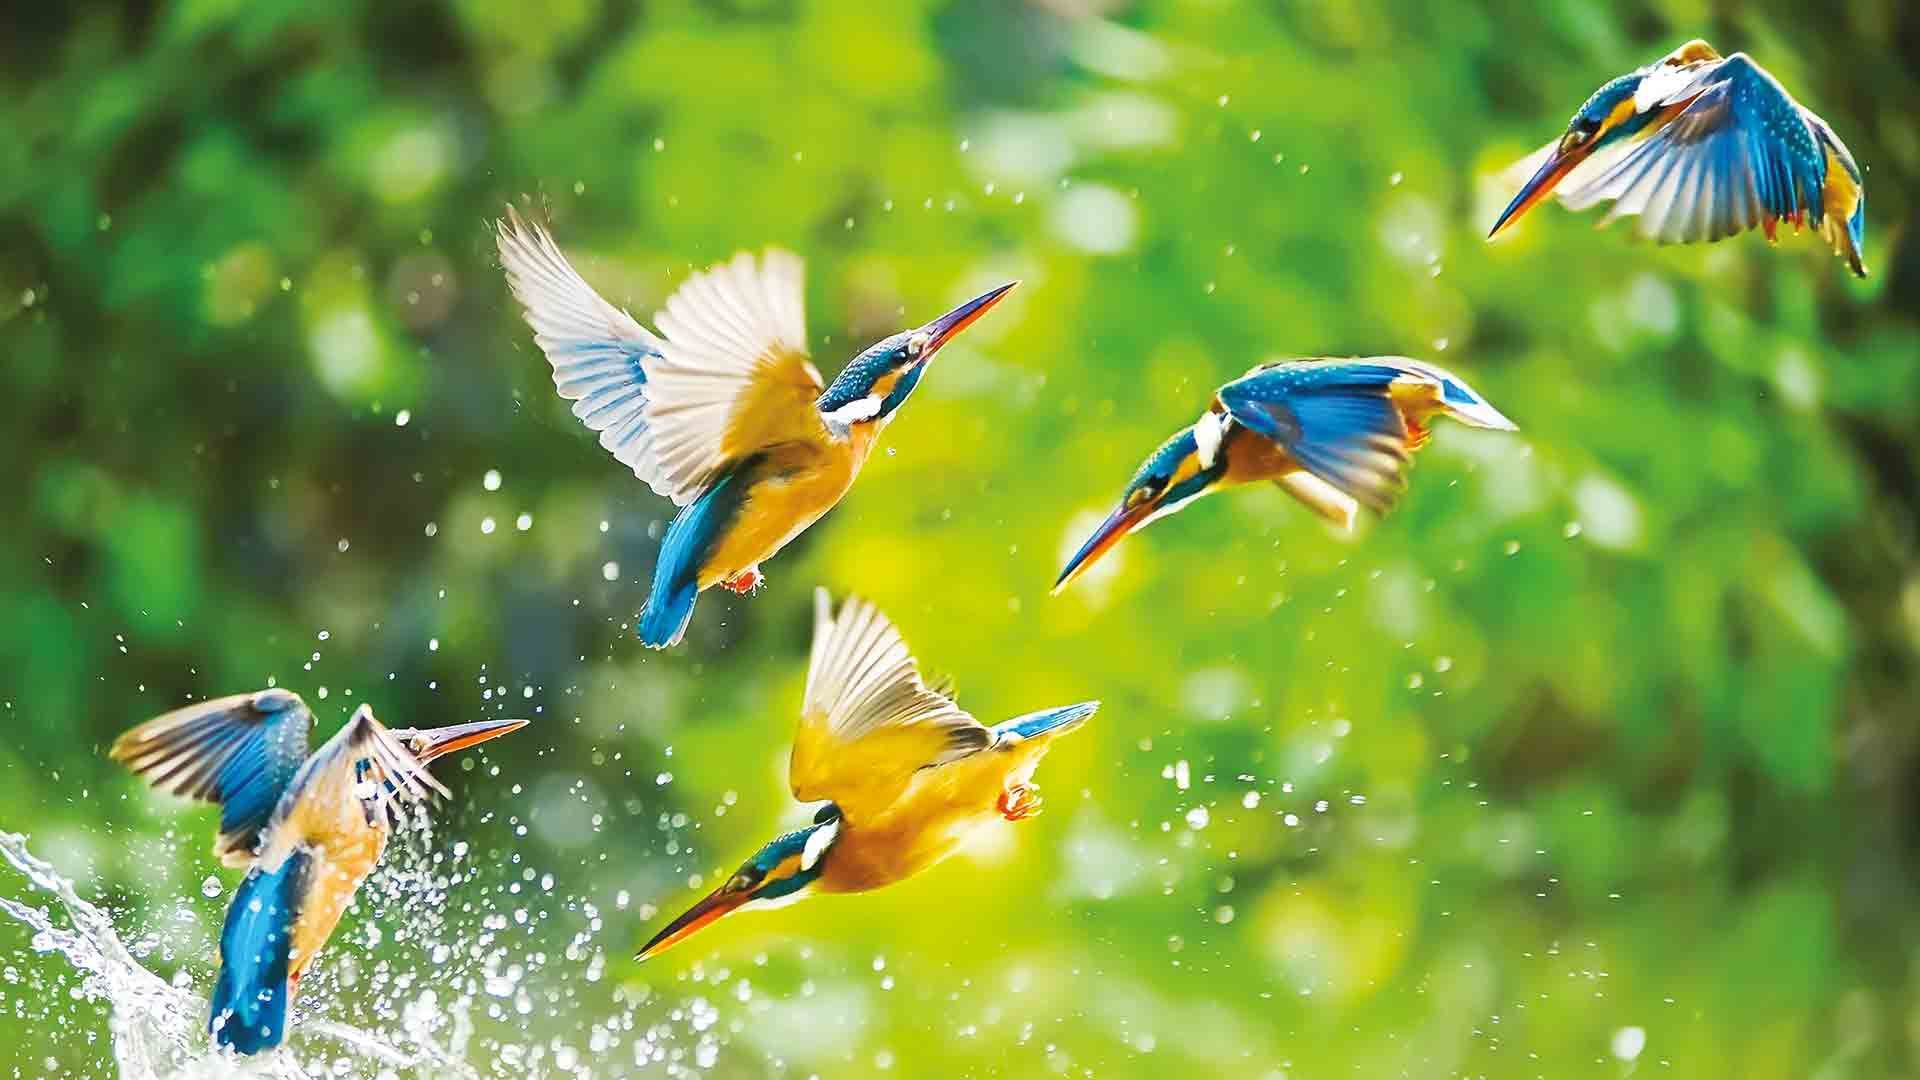 Kingfisher birds diving for fish